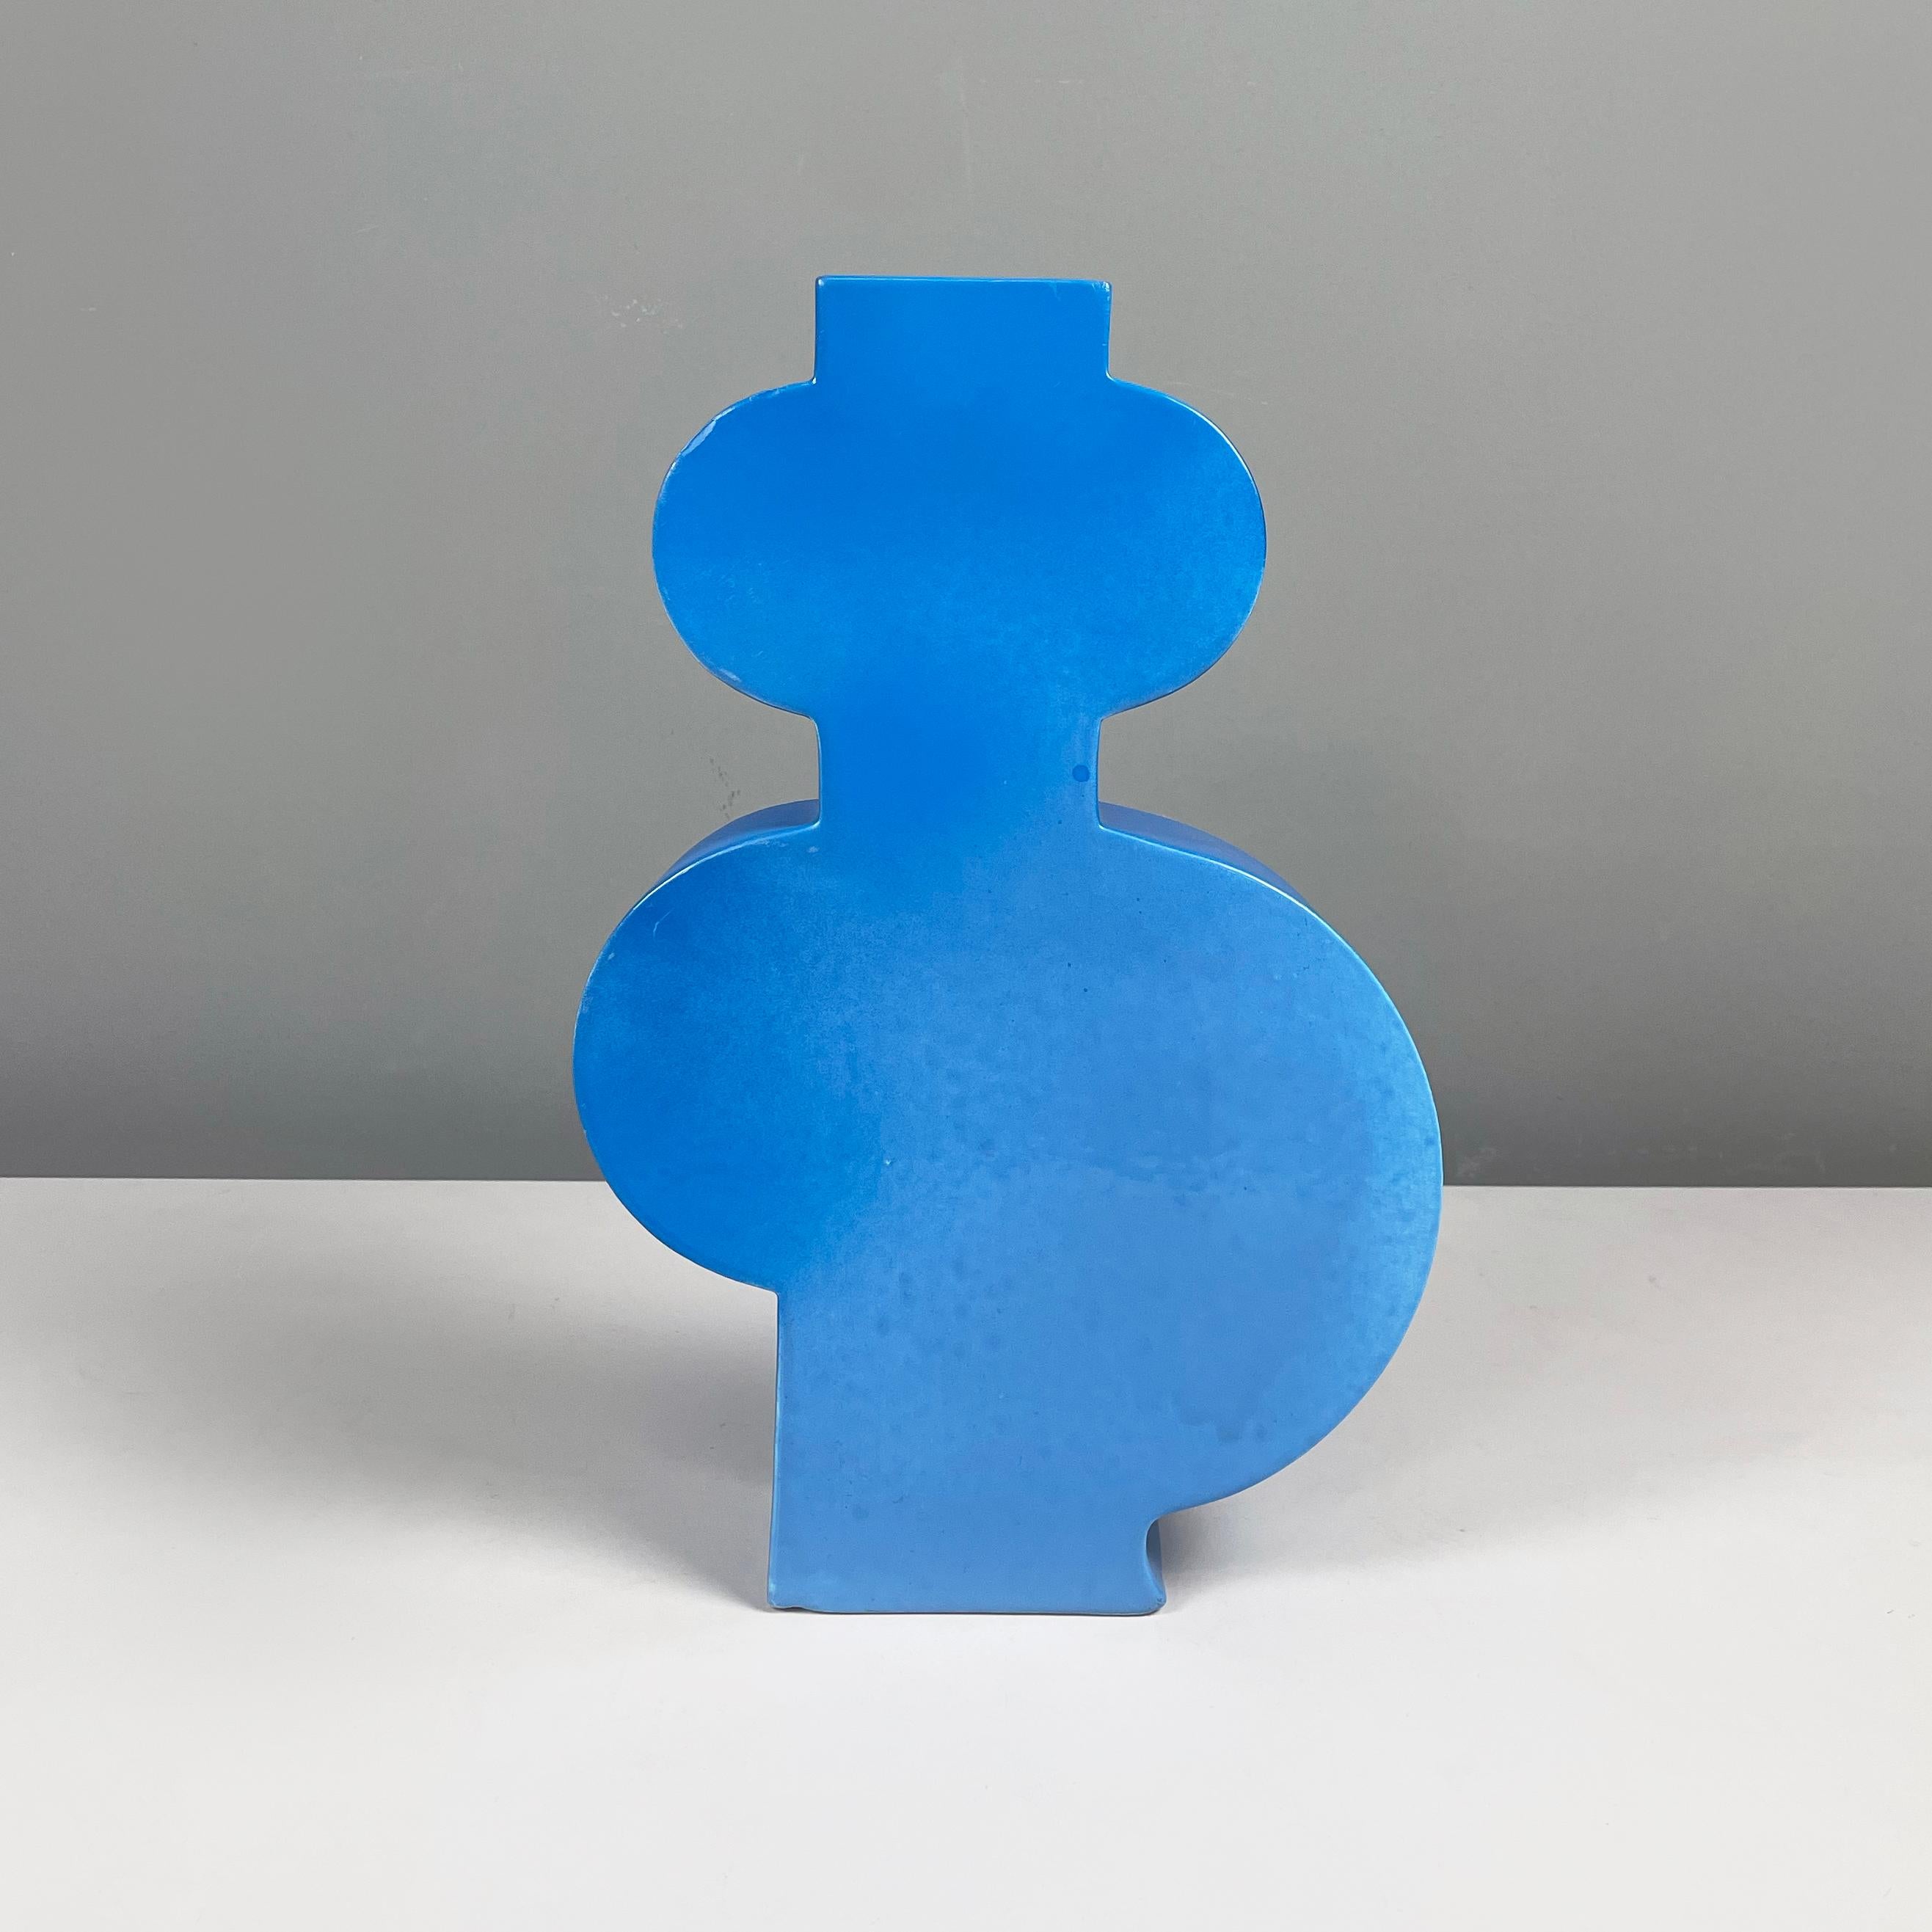 Italian postmodern Blue ceramic sculpture by Florio Pac Paccagnella, 2023
Blue vitrified ceramic sculpture with glossy finish. The subject of the sculpture is geometric and sinuous. The sculpture can also be used as a vase as it has a square hole in